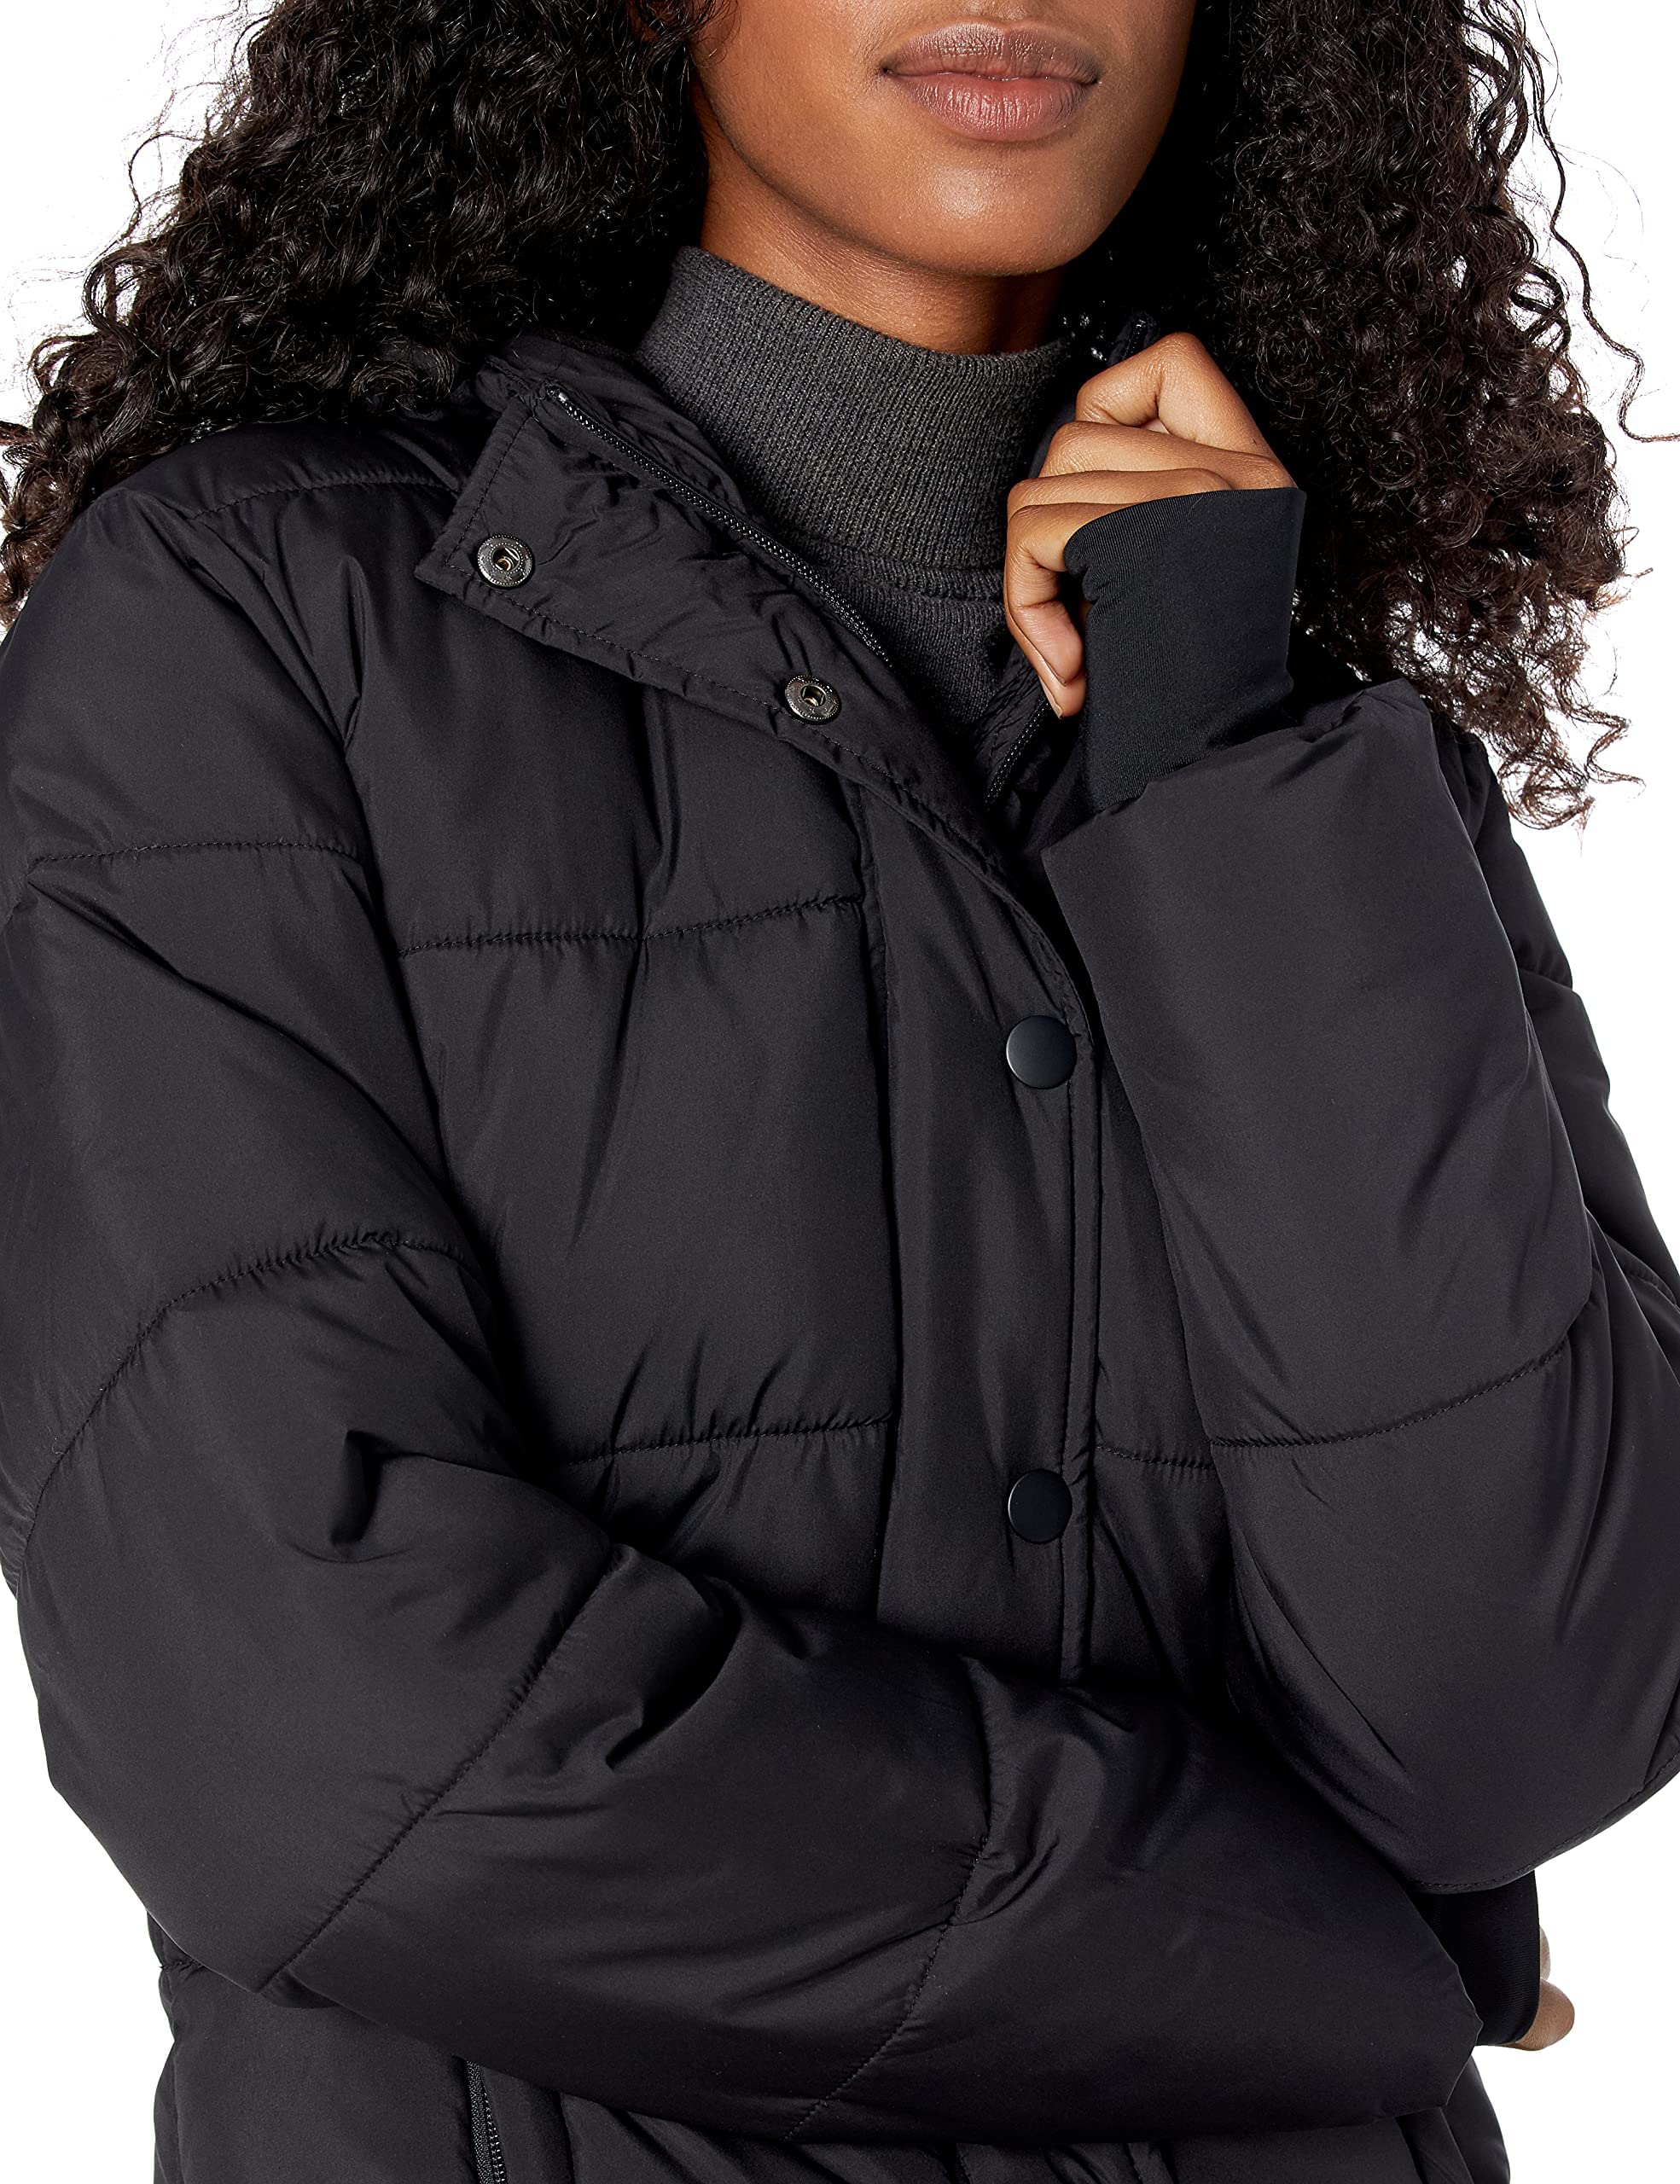 Amazon Essentials Women's Heavyweight Long-Sleeve Hooded Puffer Coat (Available in Plus Size)